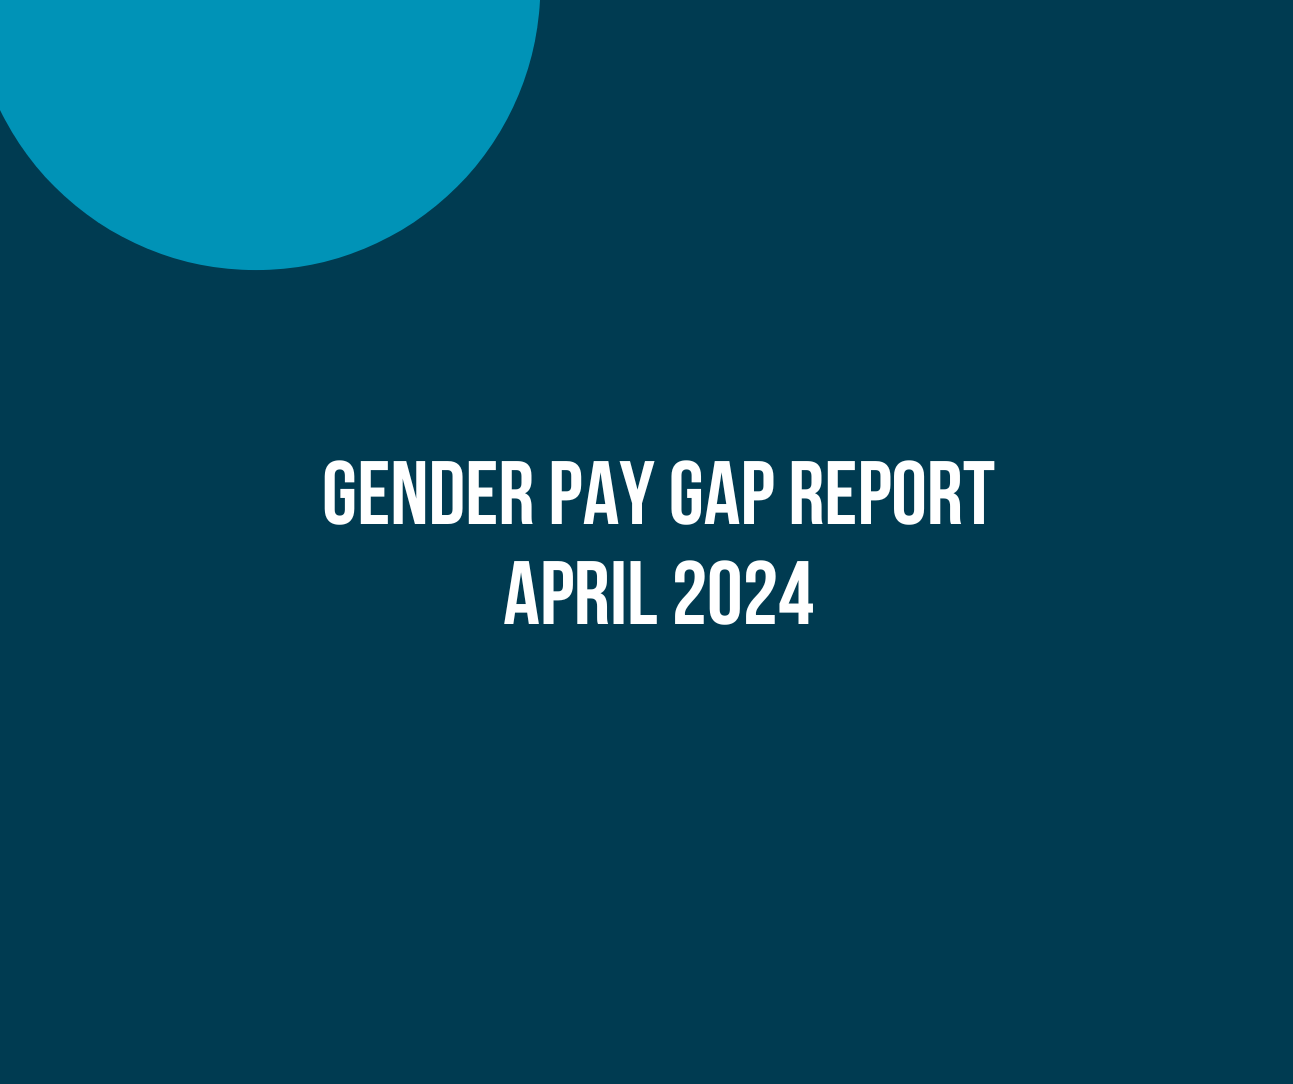 St Anne’s Gender Pay Gap Reporting March 2024